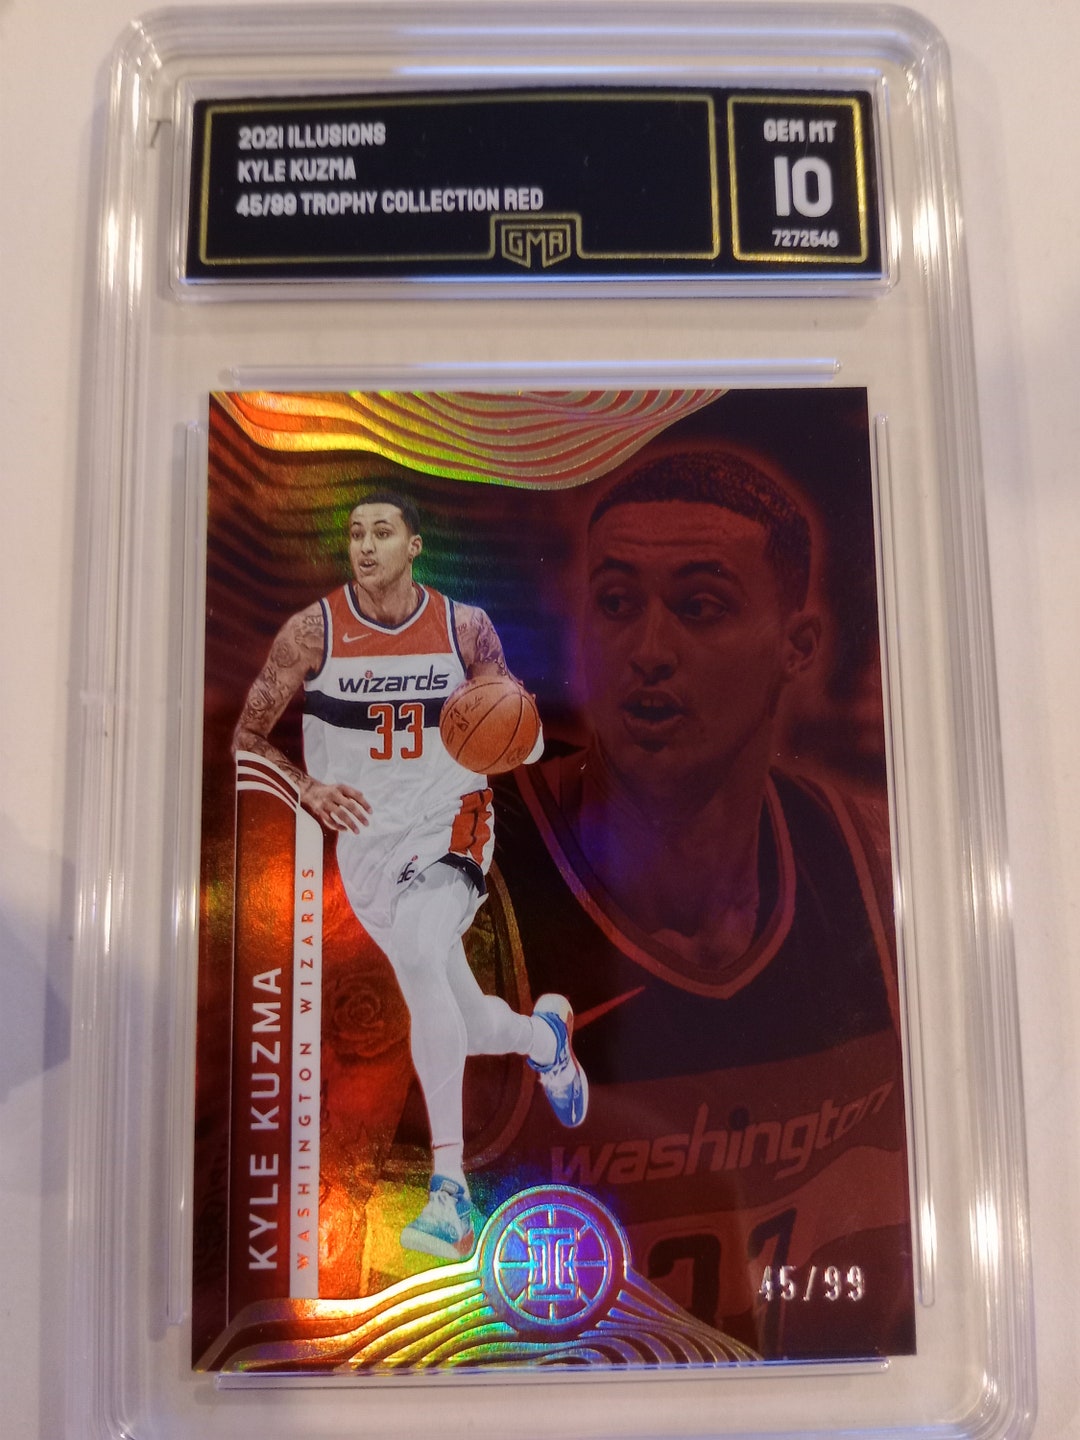 Kyle Kuzma 2021 Illusions 68 Serial 45/99 Trophy Collection Red GMA 10 ...